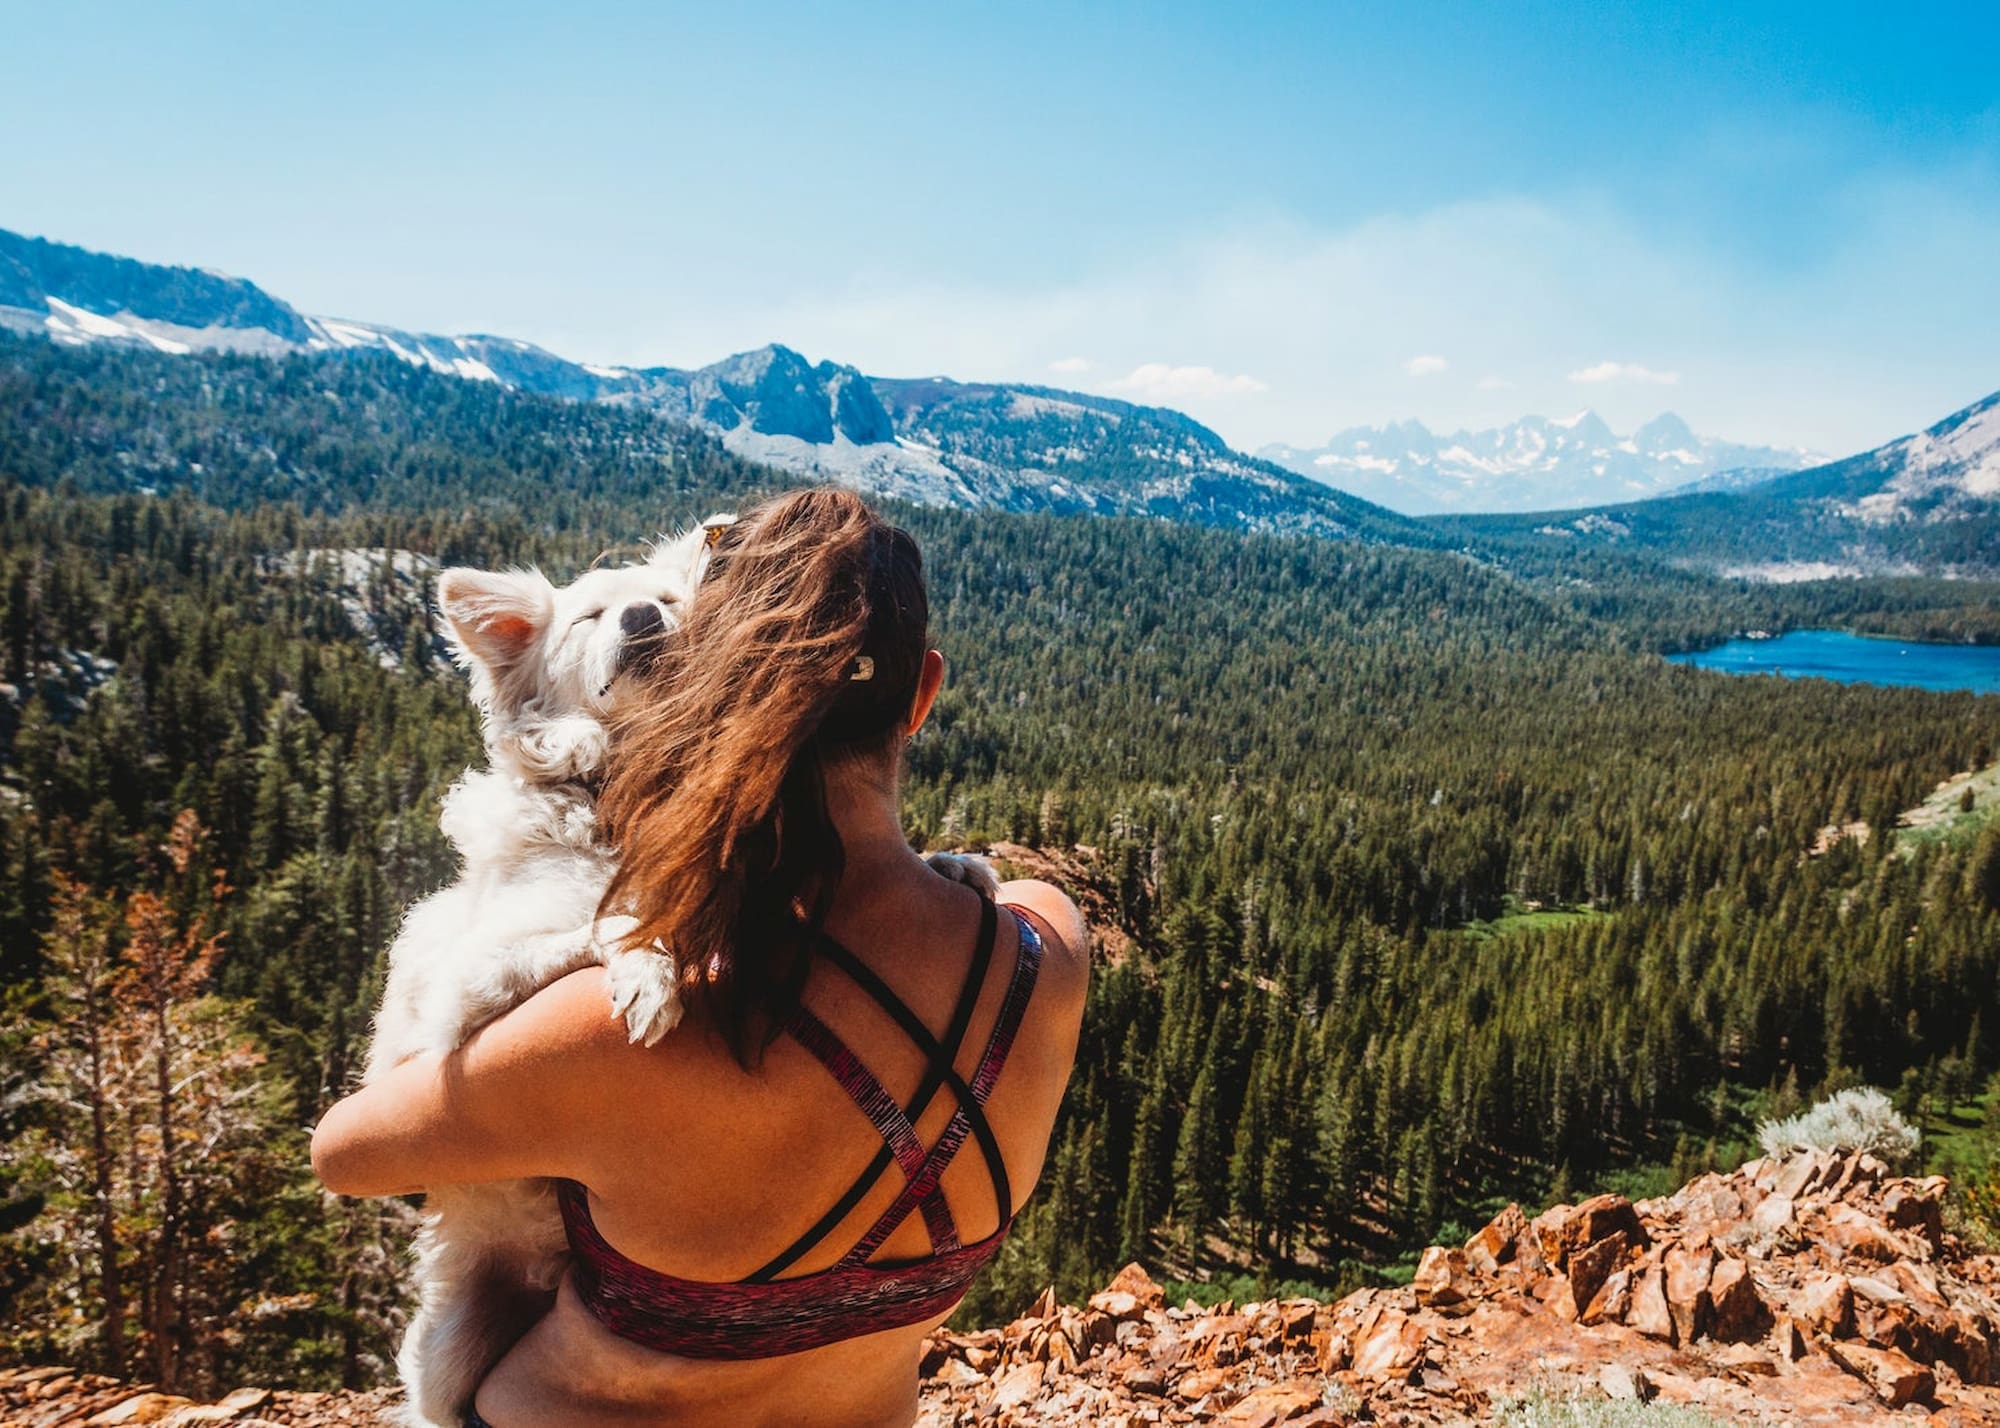 woman holding dog overlooking lake and forest